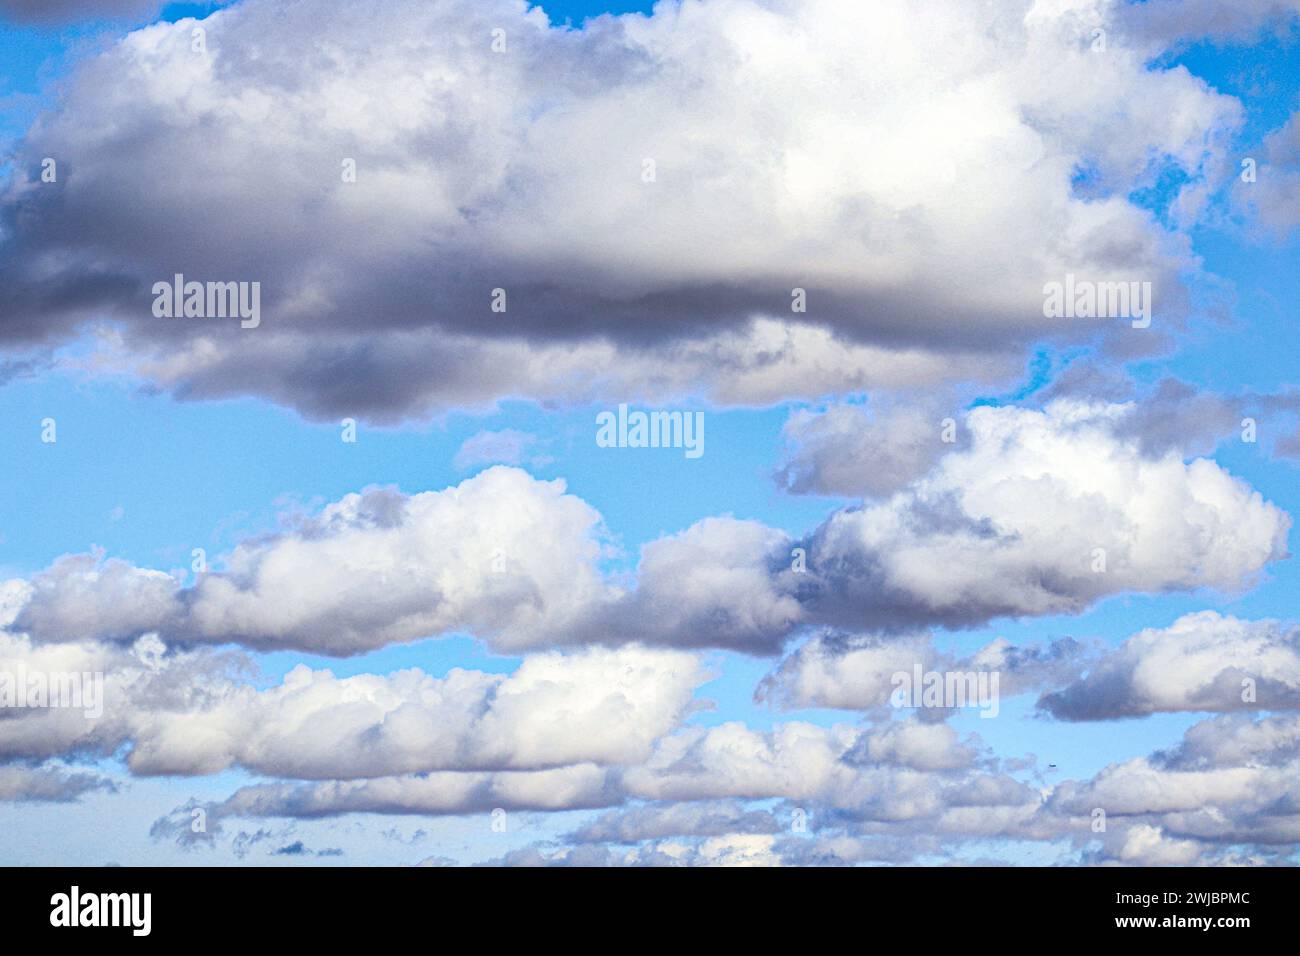 Herd of sheep grazing in an open field against cloudy sky Stock Photo